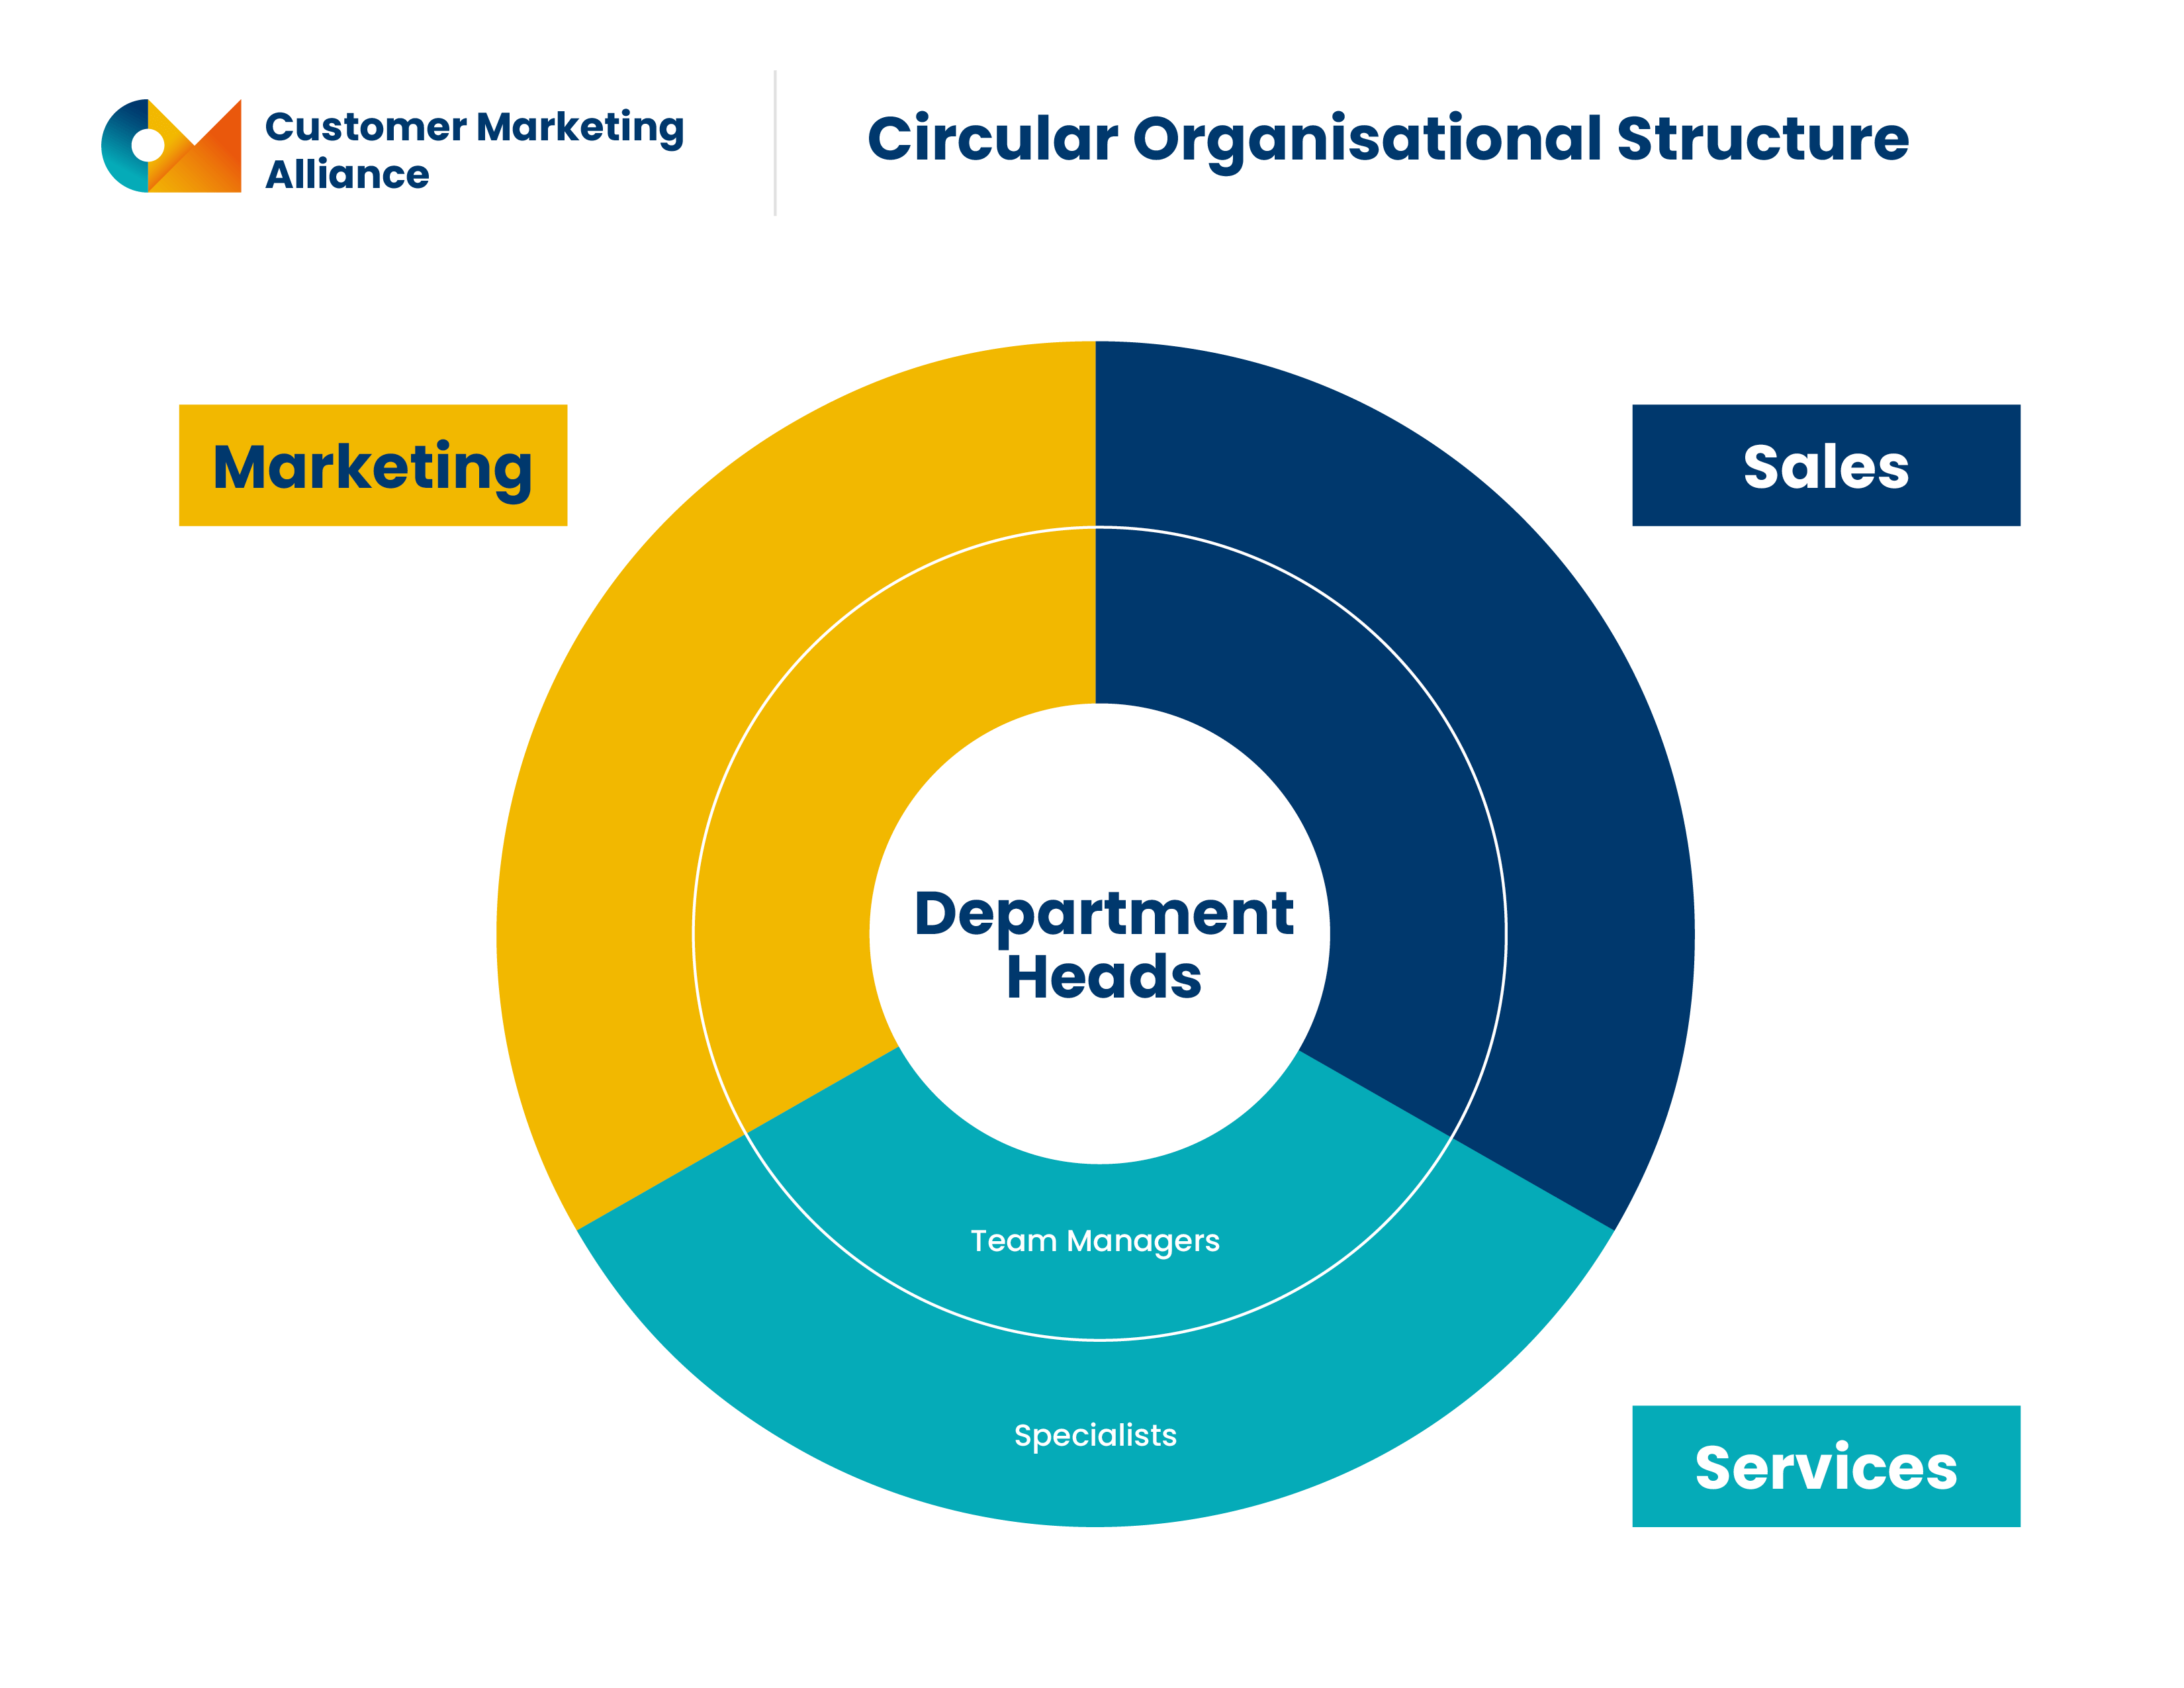 Graphic depicting the Circular Organizational Structure segmented into Marketing, Services, and Sales. The circle begins with Department Heads, which is then surrounded by Team Heads and Specialists.